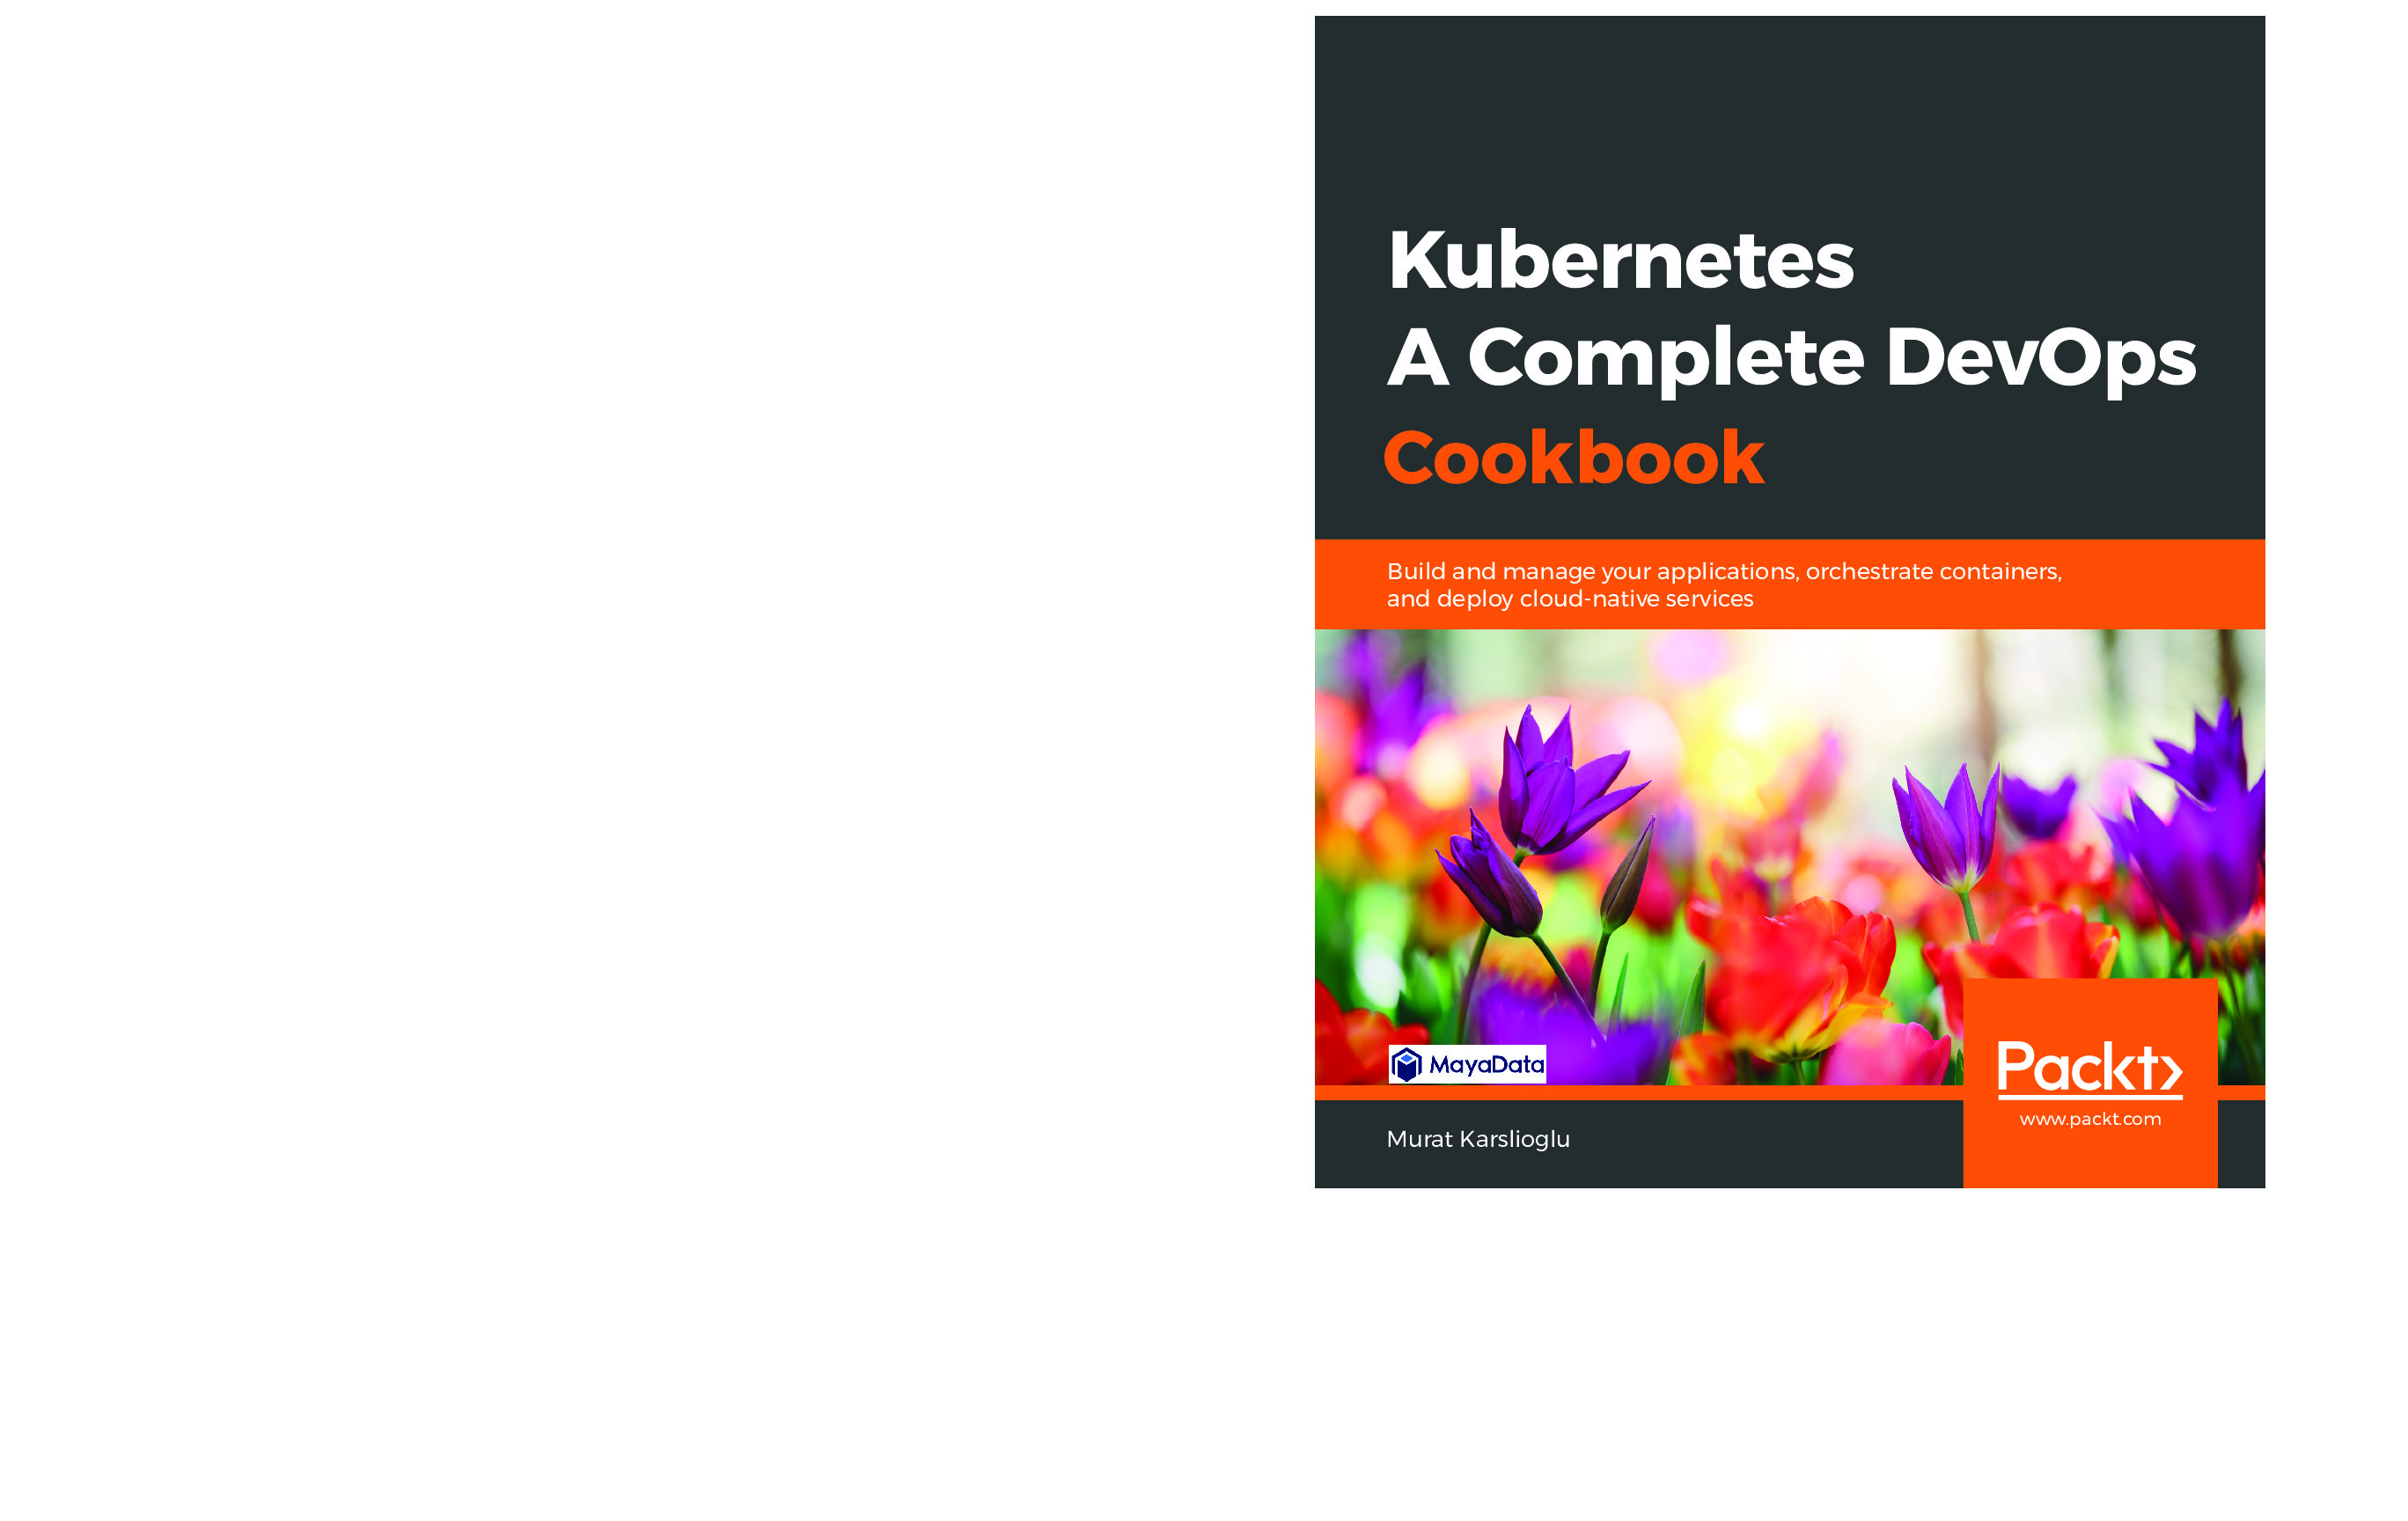 Kubernetes_A_Complete_DevOps_Cookbook_Build_and_manage_your_applications